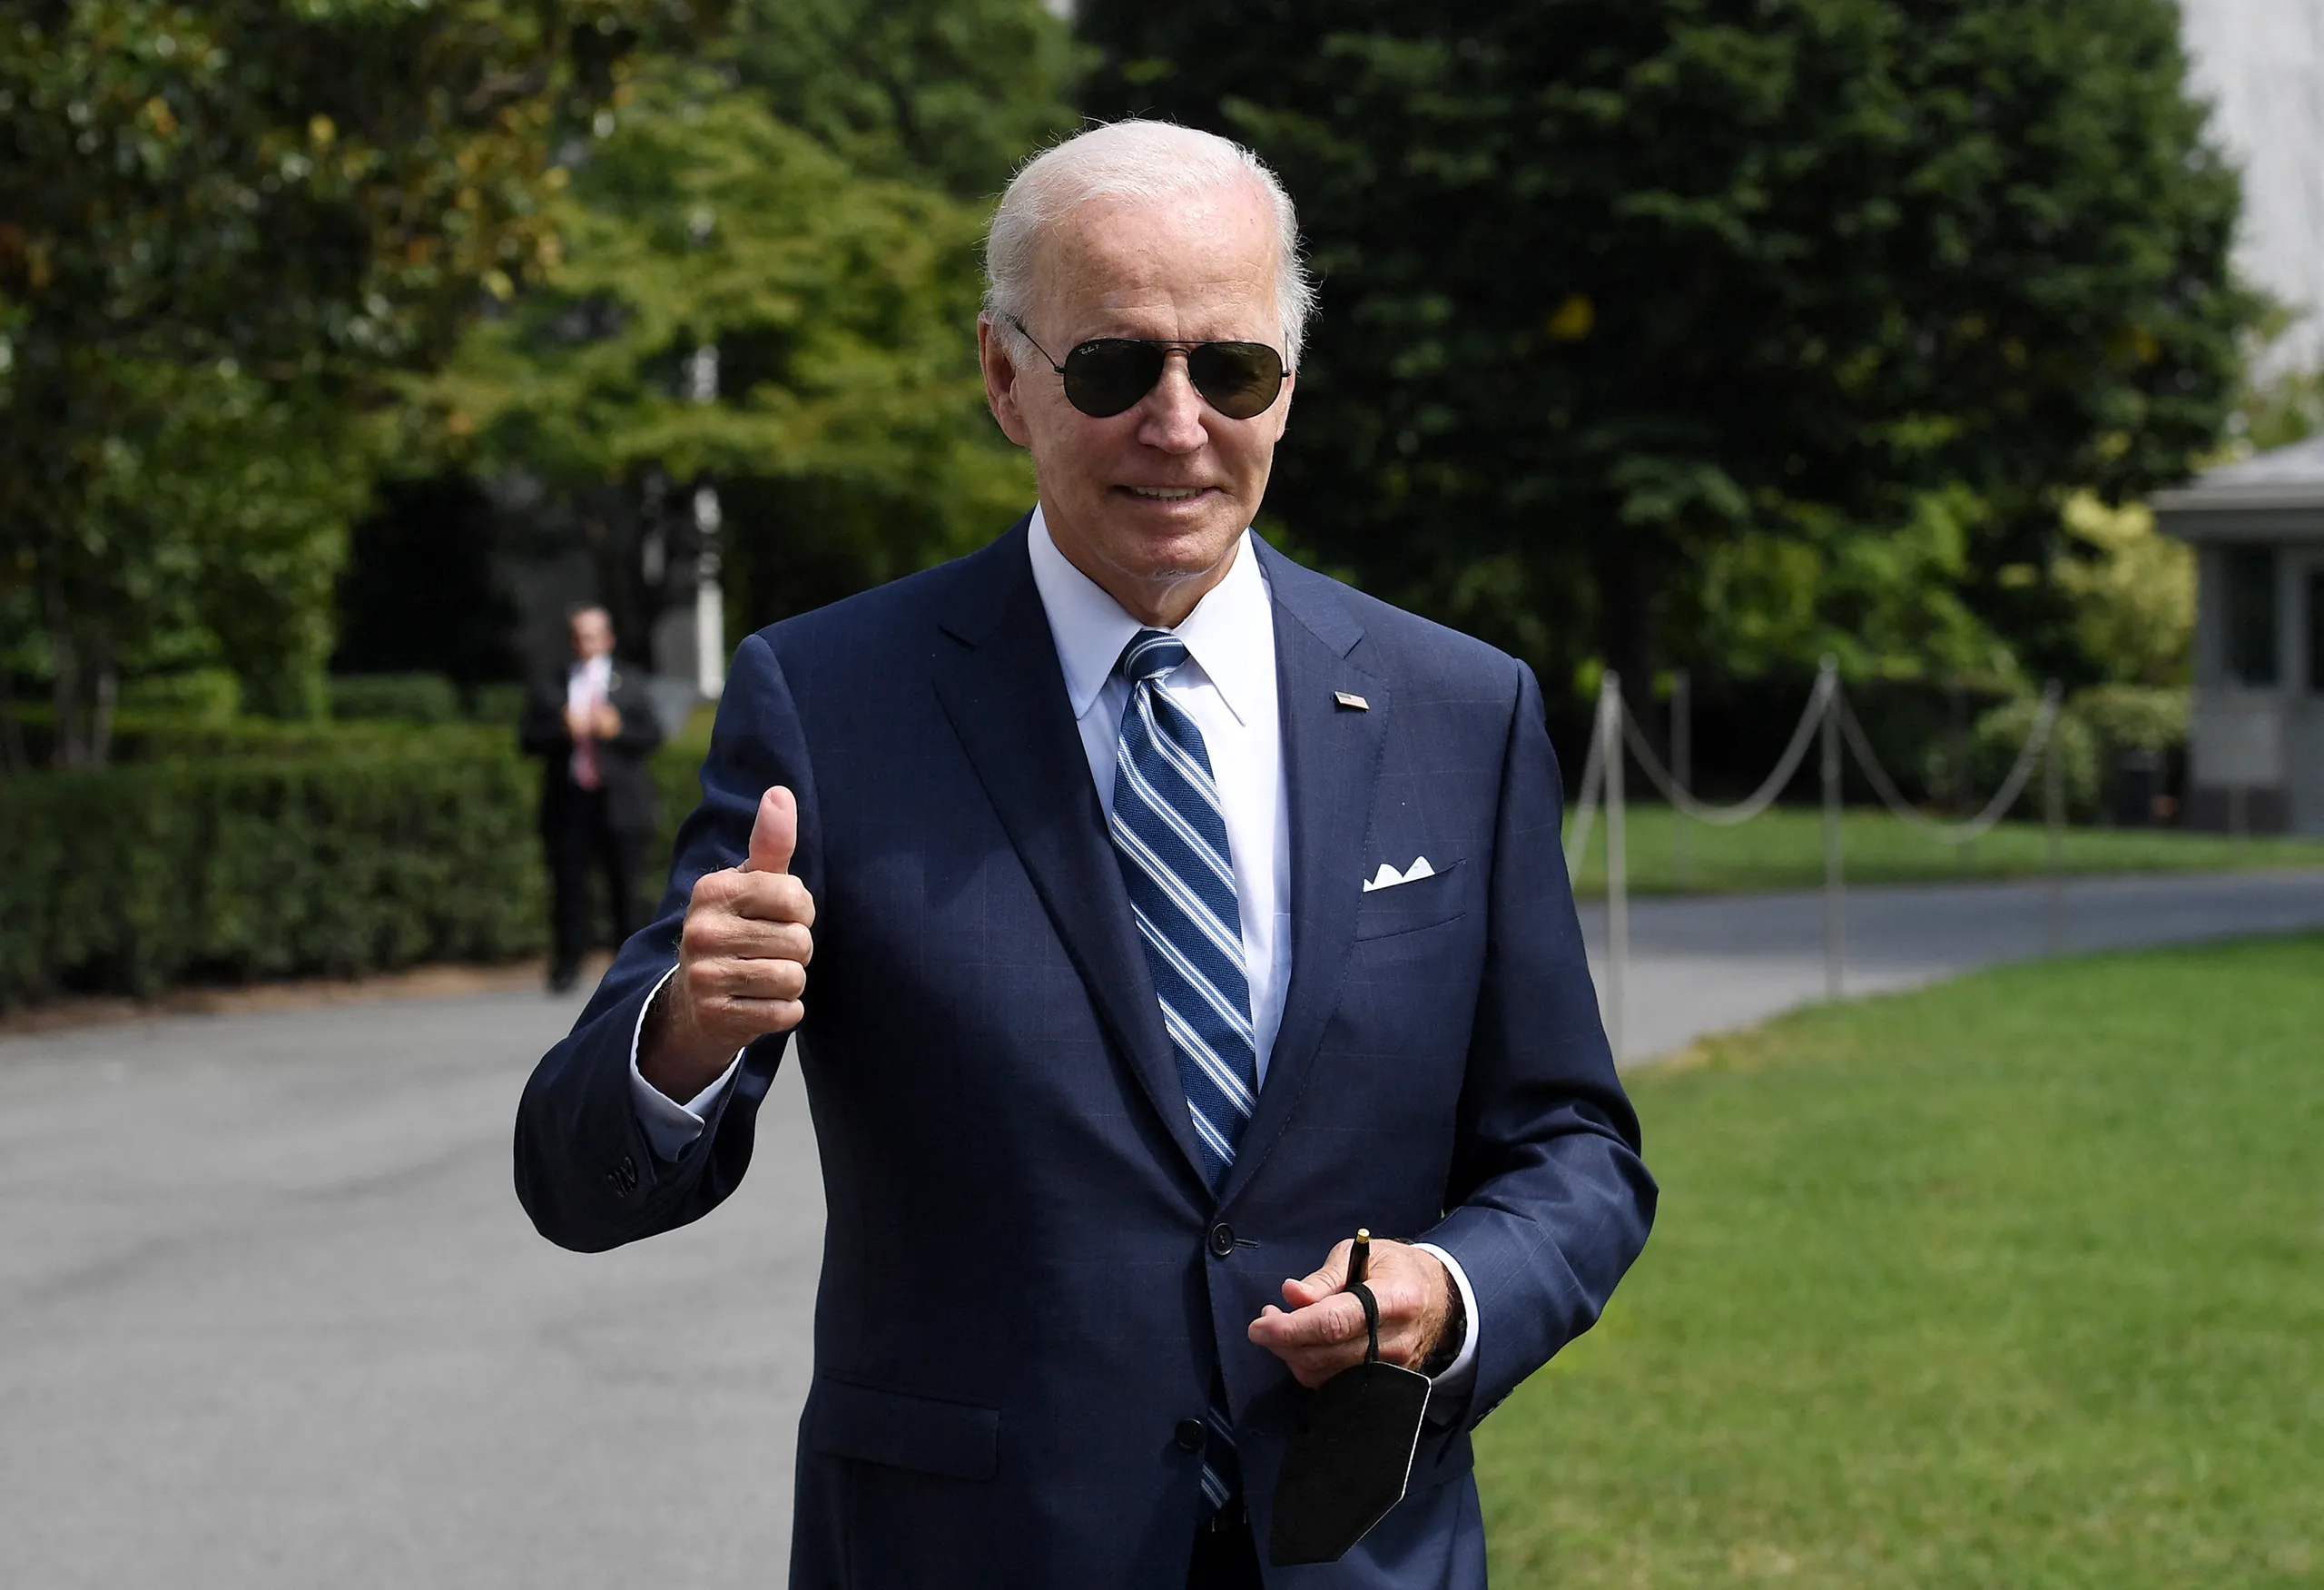 Biden will travel to Hawaii "as soon as possible" to assess the damage from the fires
